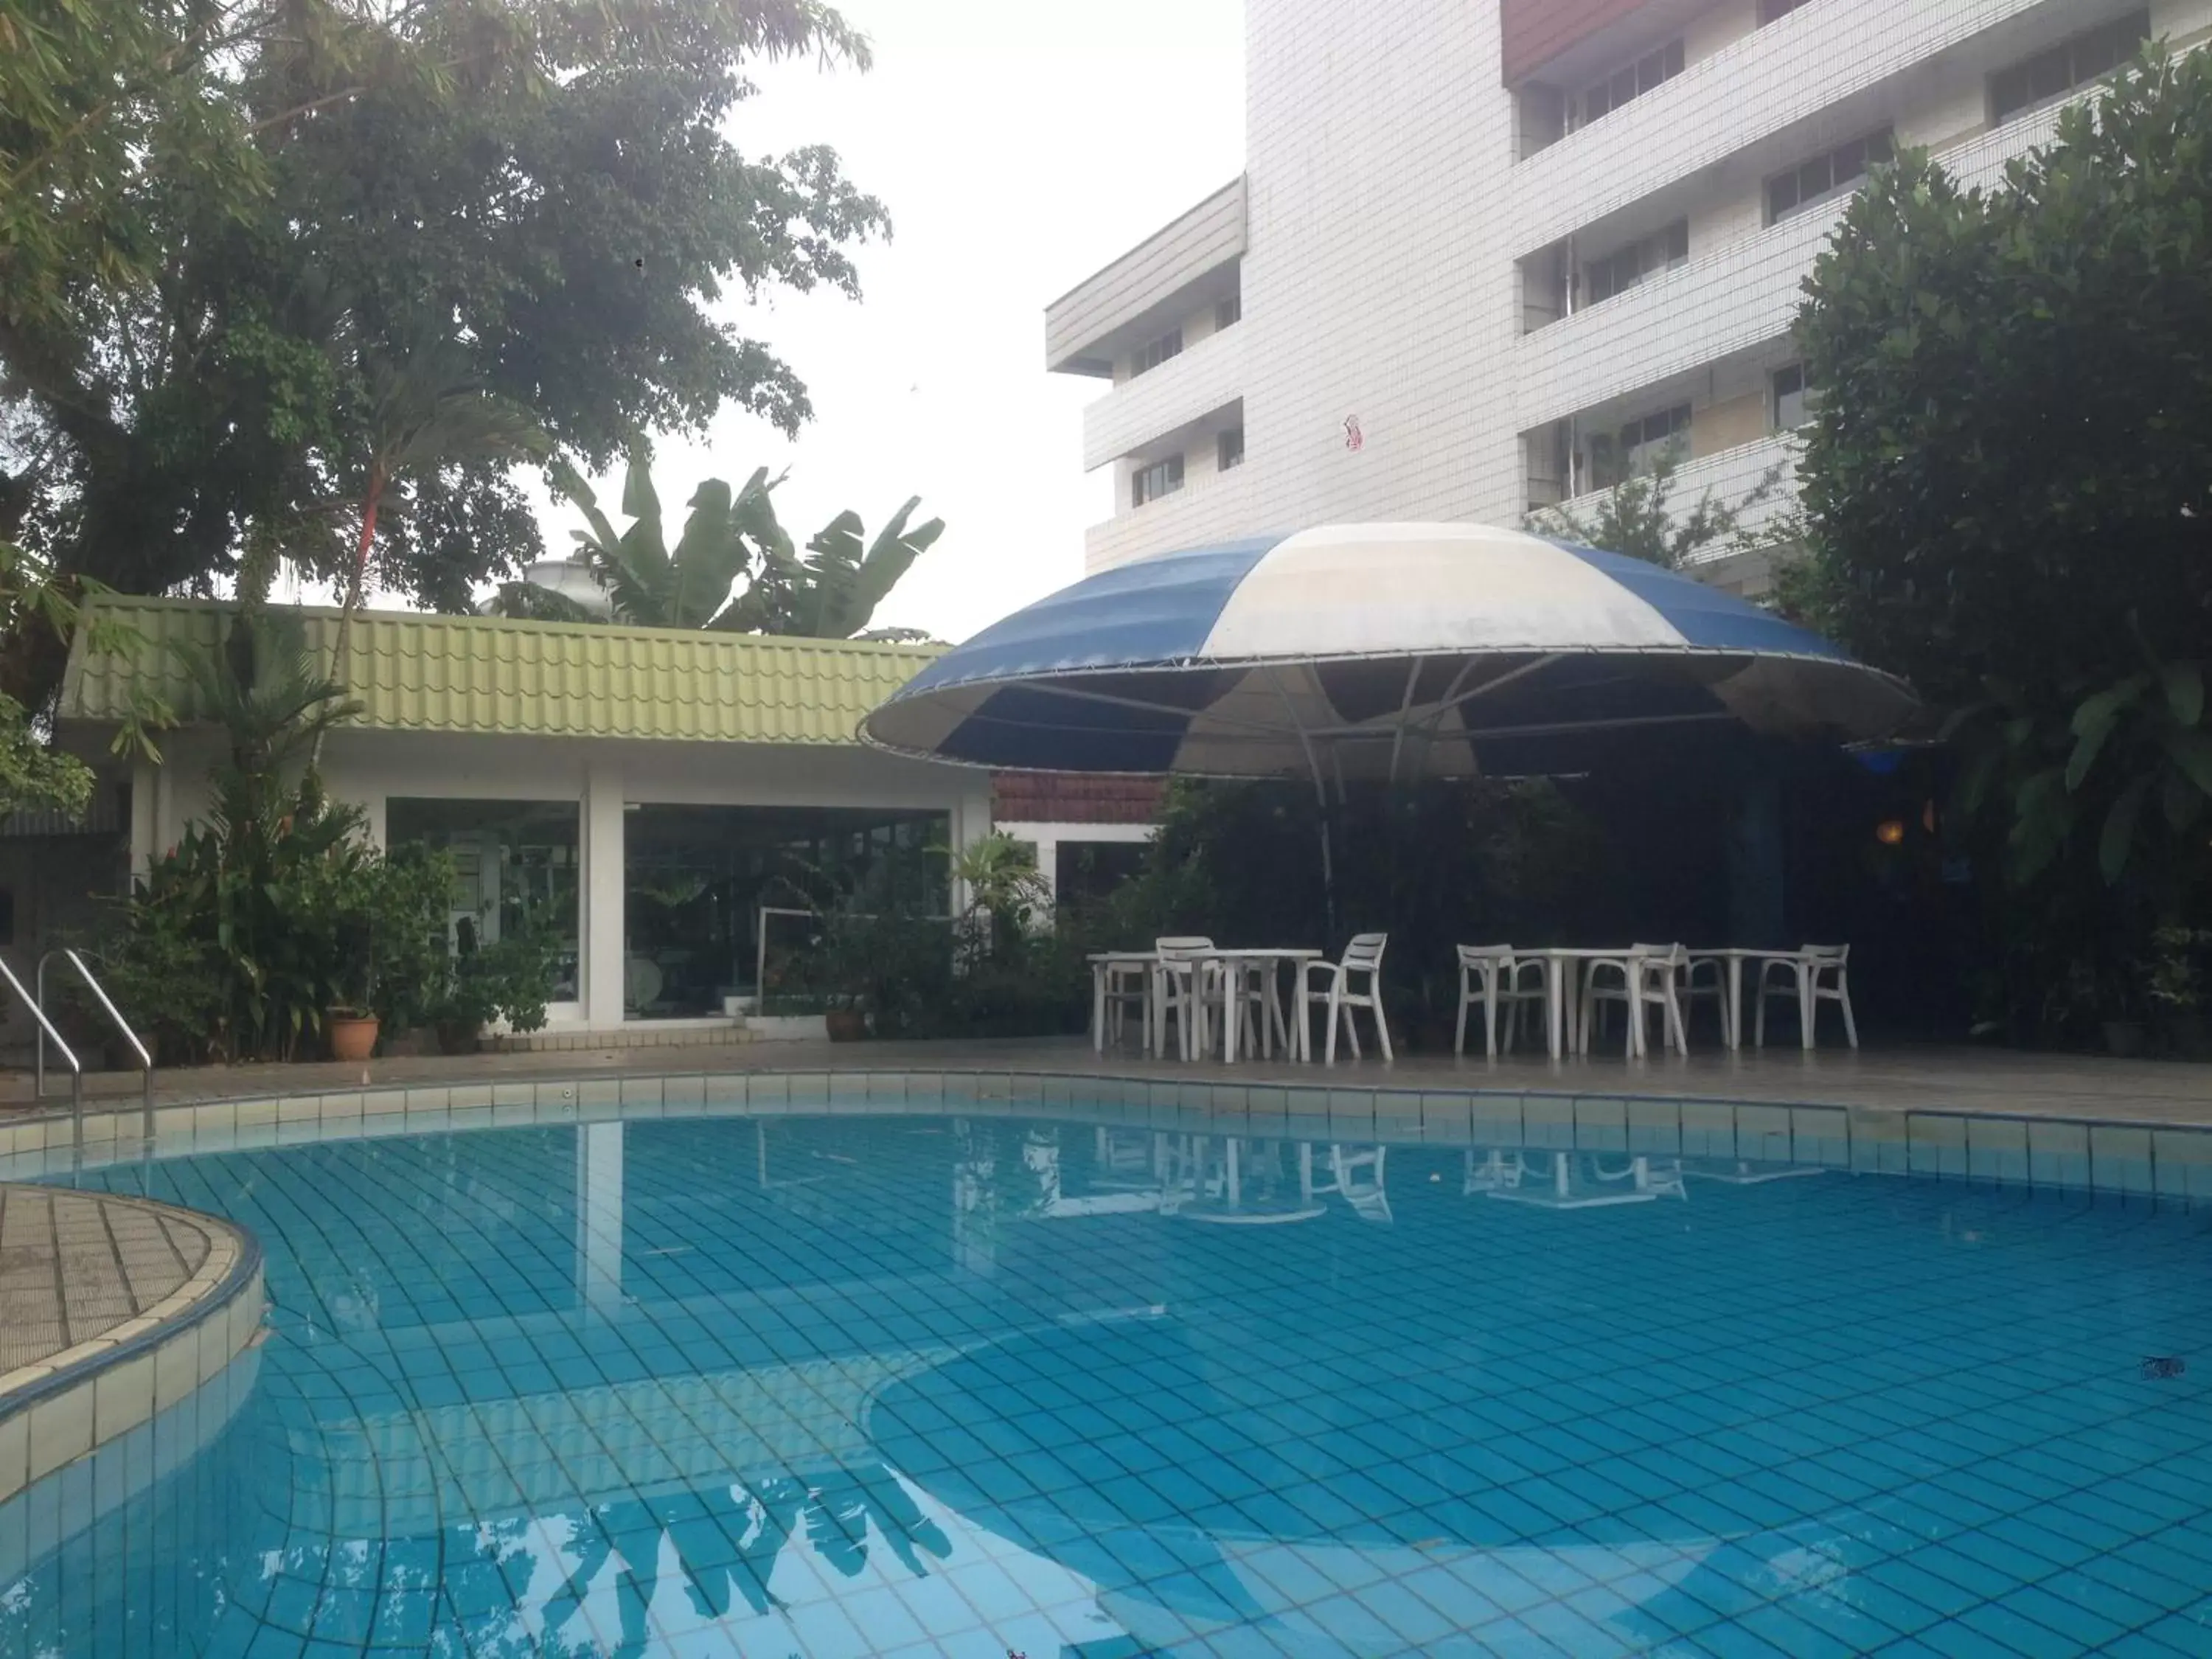 Pool view, Property Building in Terrace Hotel